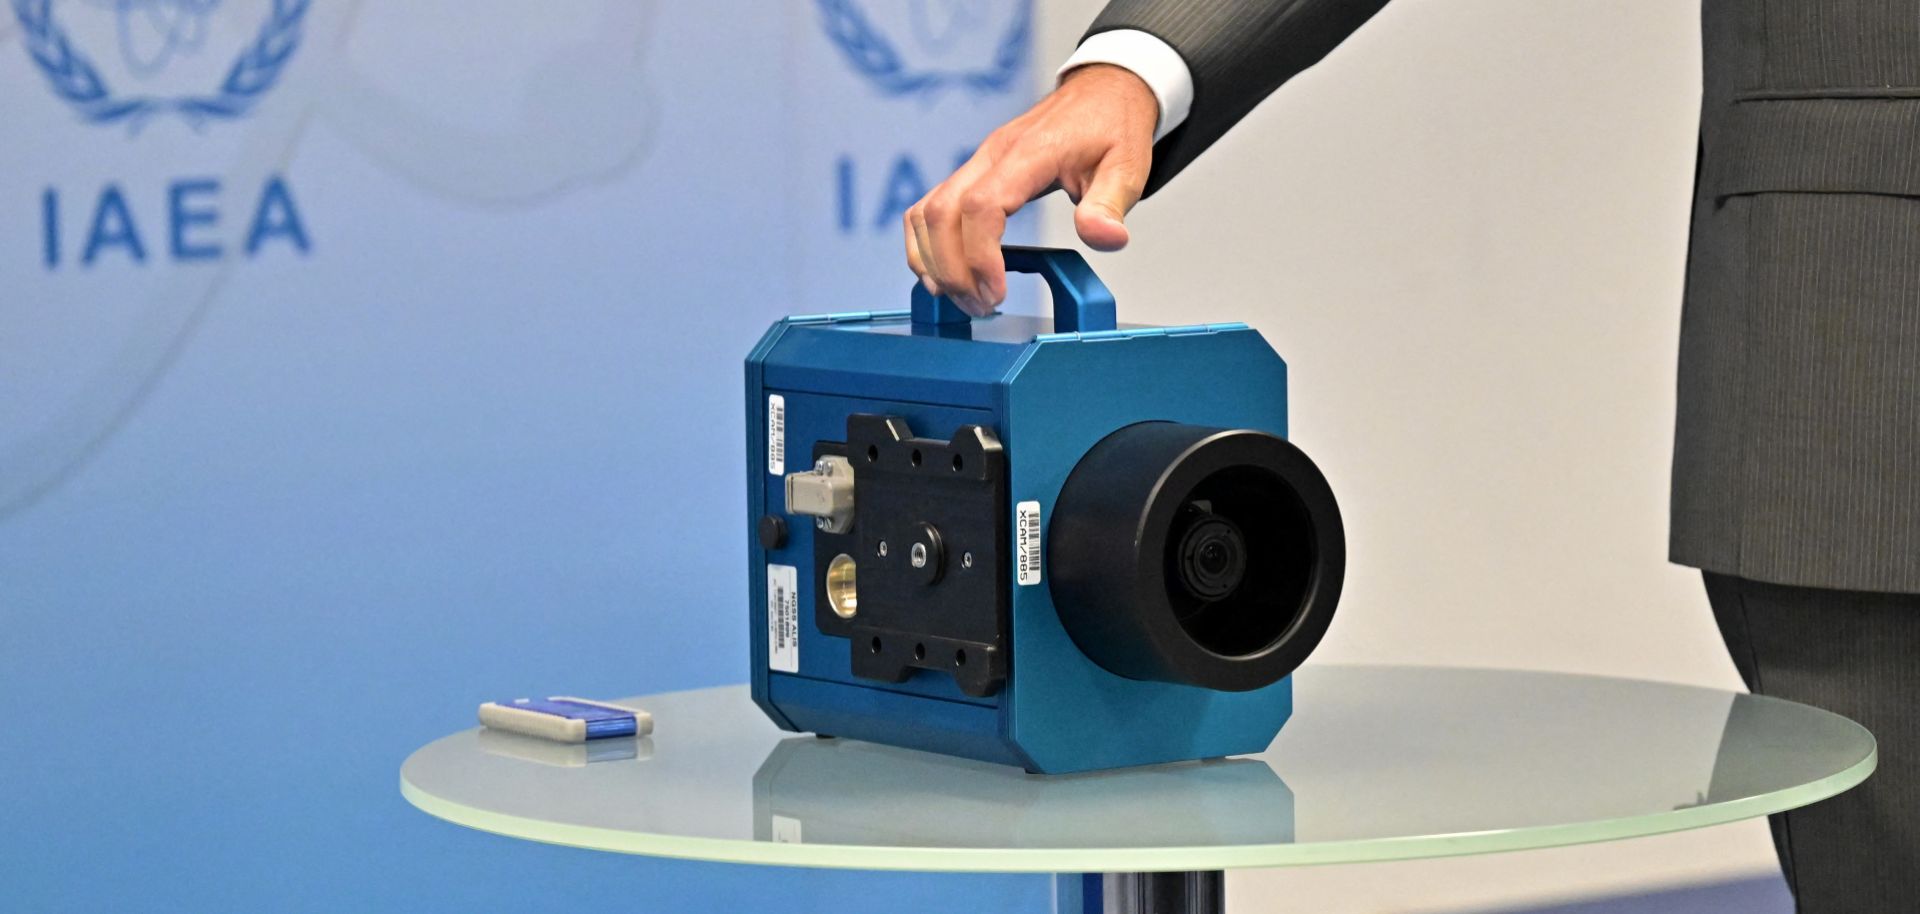 Rafael Grossi, the head of the International Atomic Energy Agency (IAEA), shows journalists one of the cameras used to monitor Iran’s nuclear activity during a press conference in Vienna on June 9, 2022, after Tehran announced it was turning off 27 such cameras. 